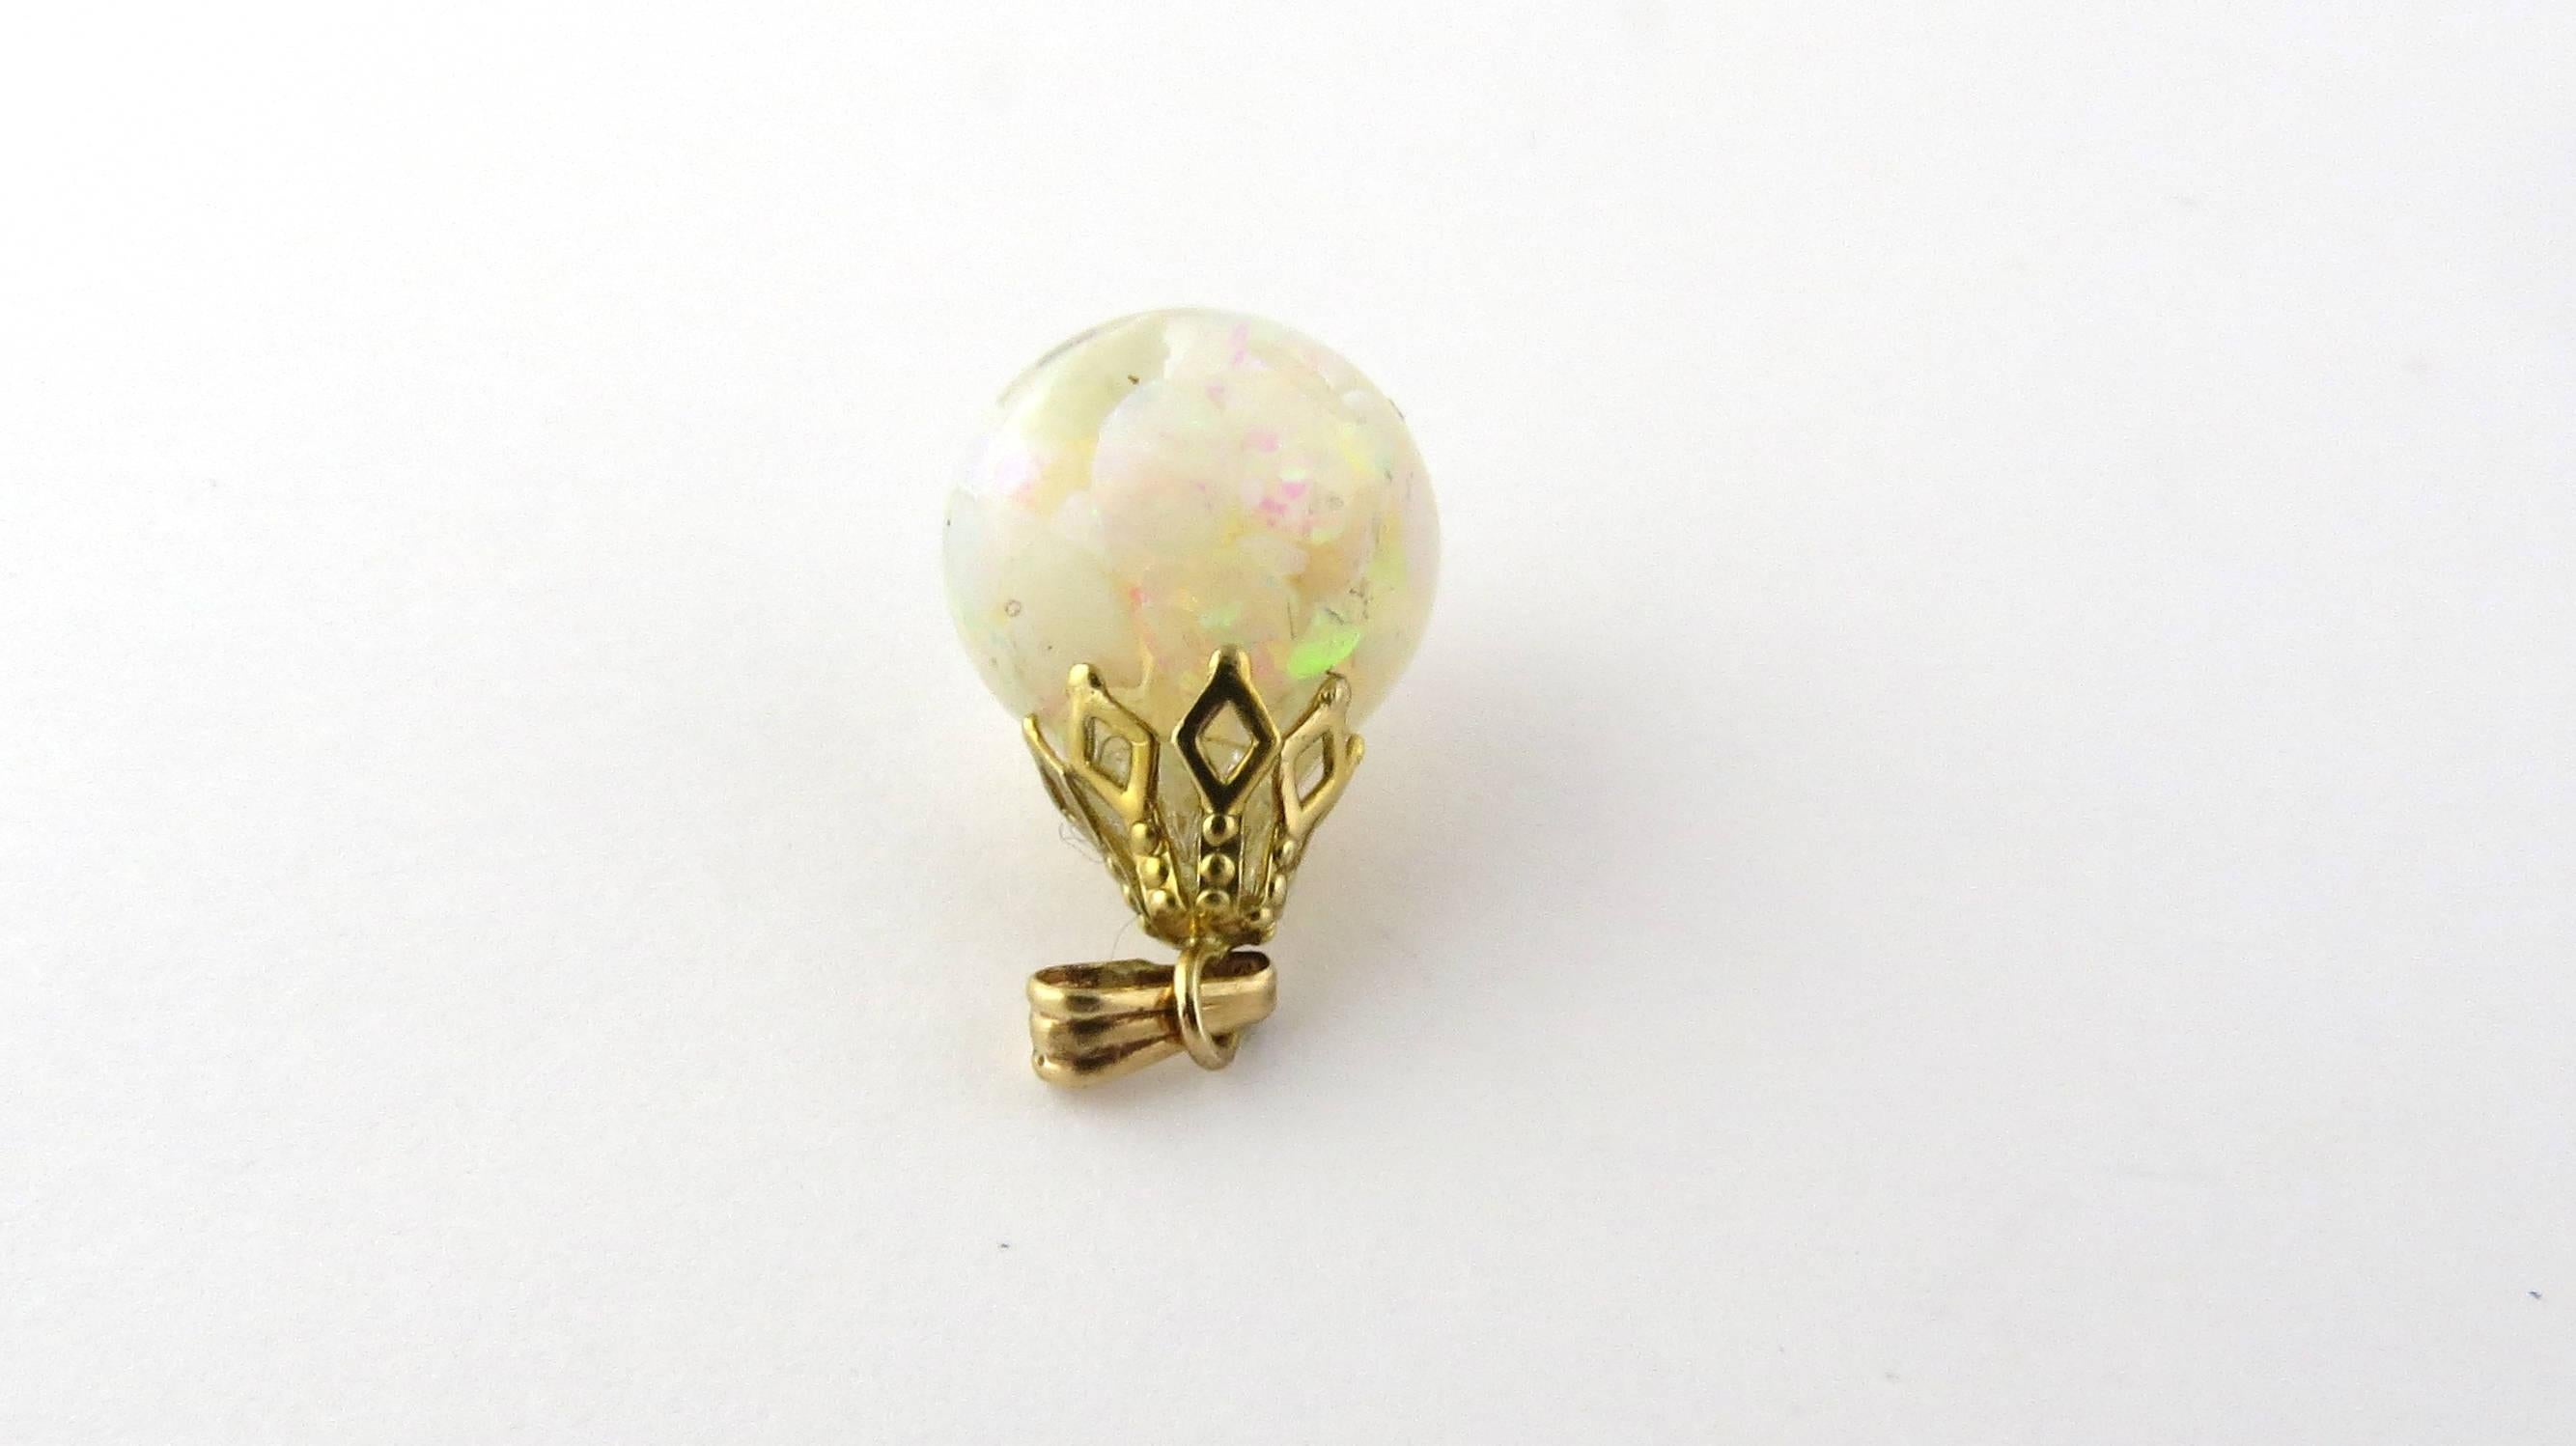 Vintage 14 Karat Yellow Gold Opal Pendant-

This unique pendant features a glass drop filled with genuine opal chips and held by a beautifully embossed yellow gold setting.

Size: 19 mm x 12 mm (actual pendant)

Weight: 1.2 dwt. / 2.0 gr.

Hallmark: